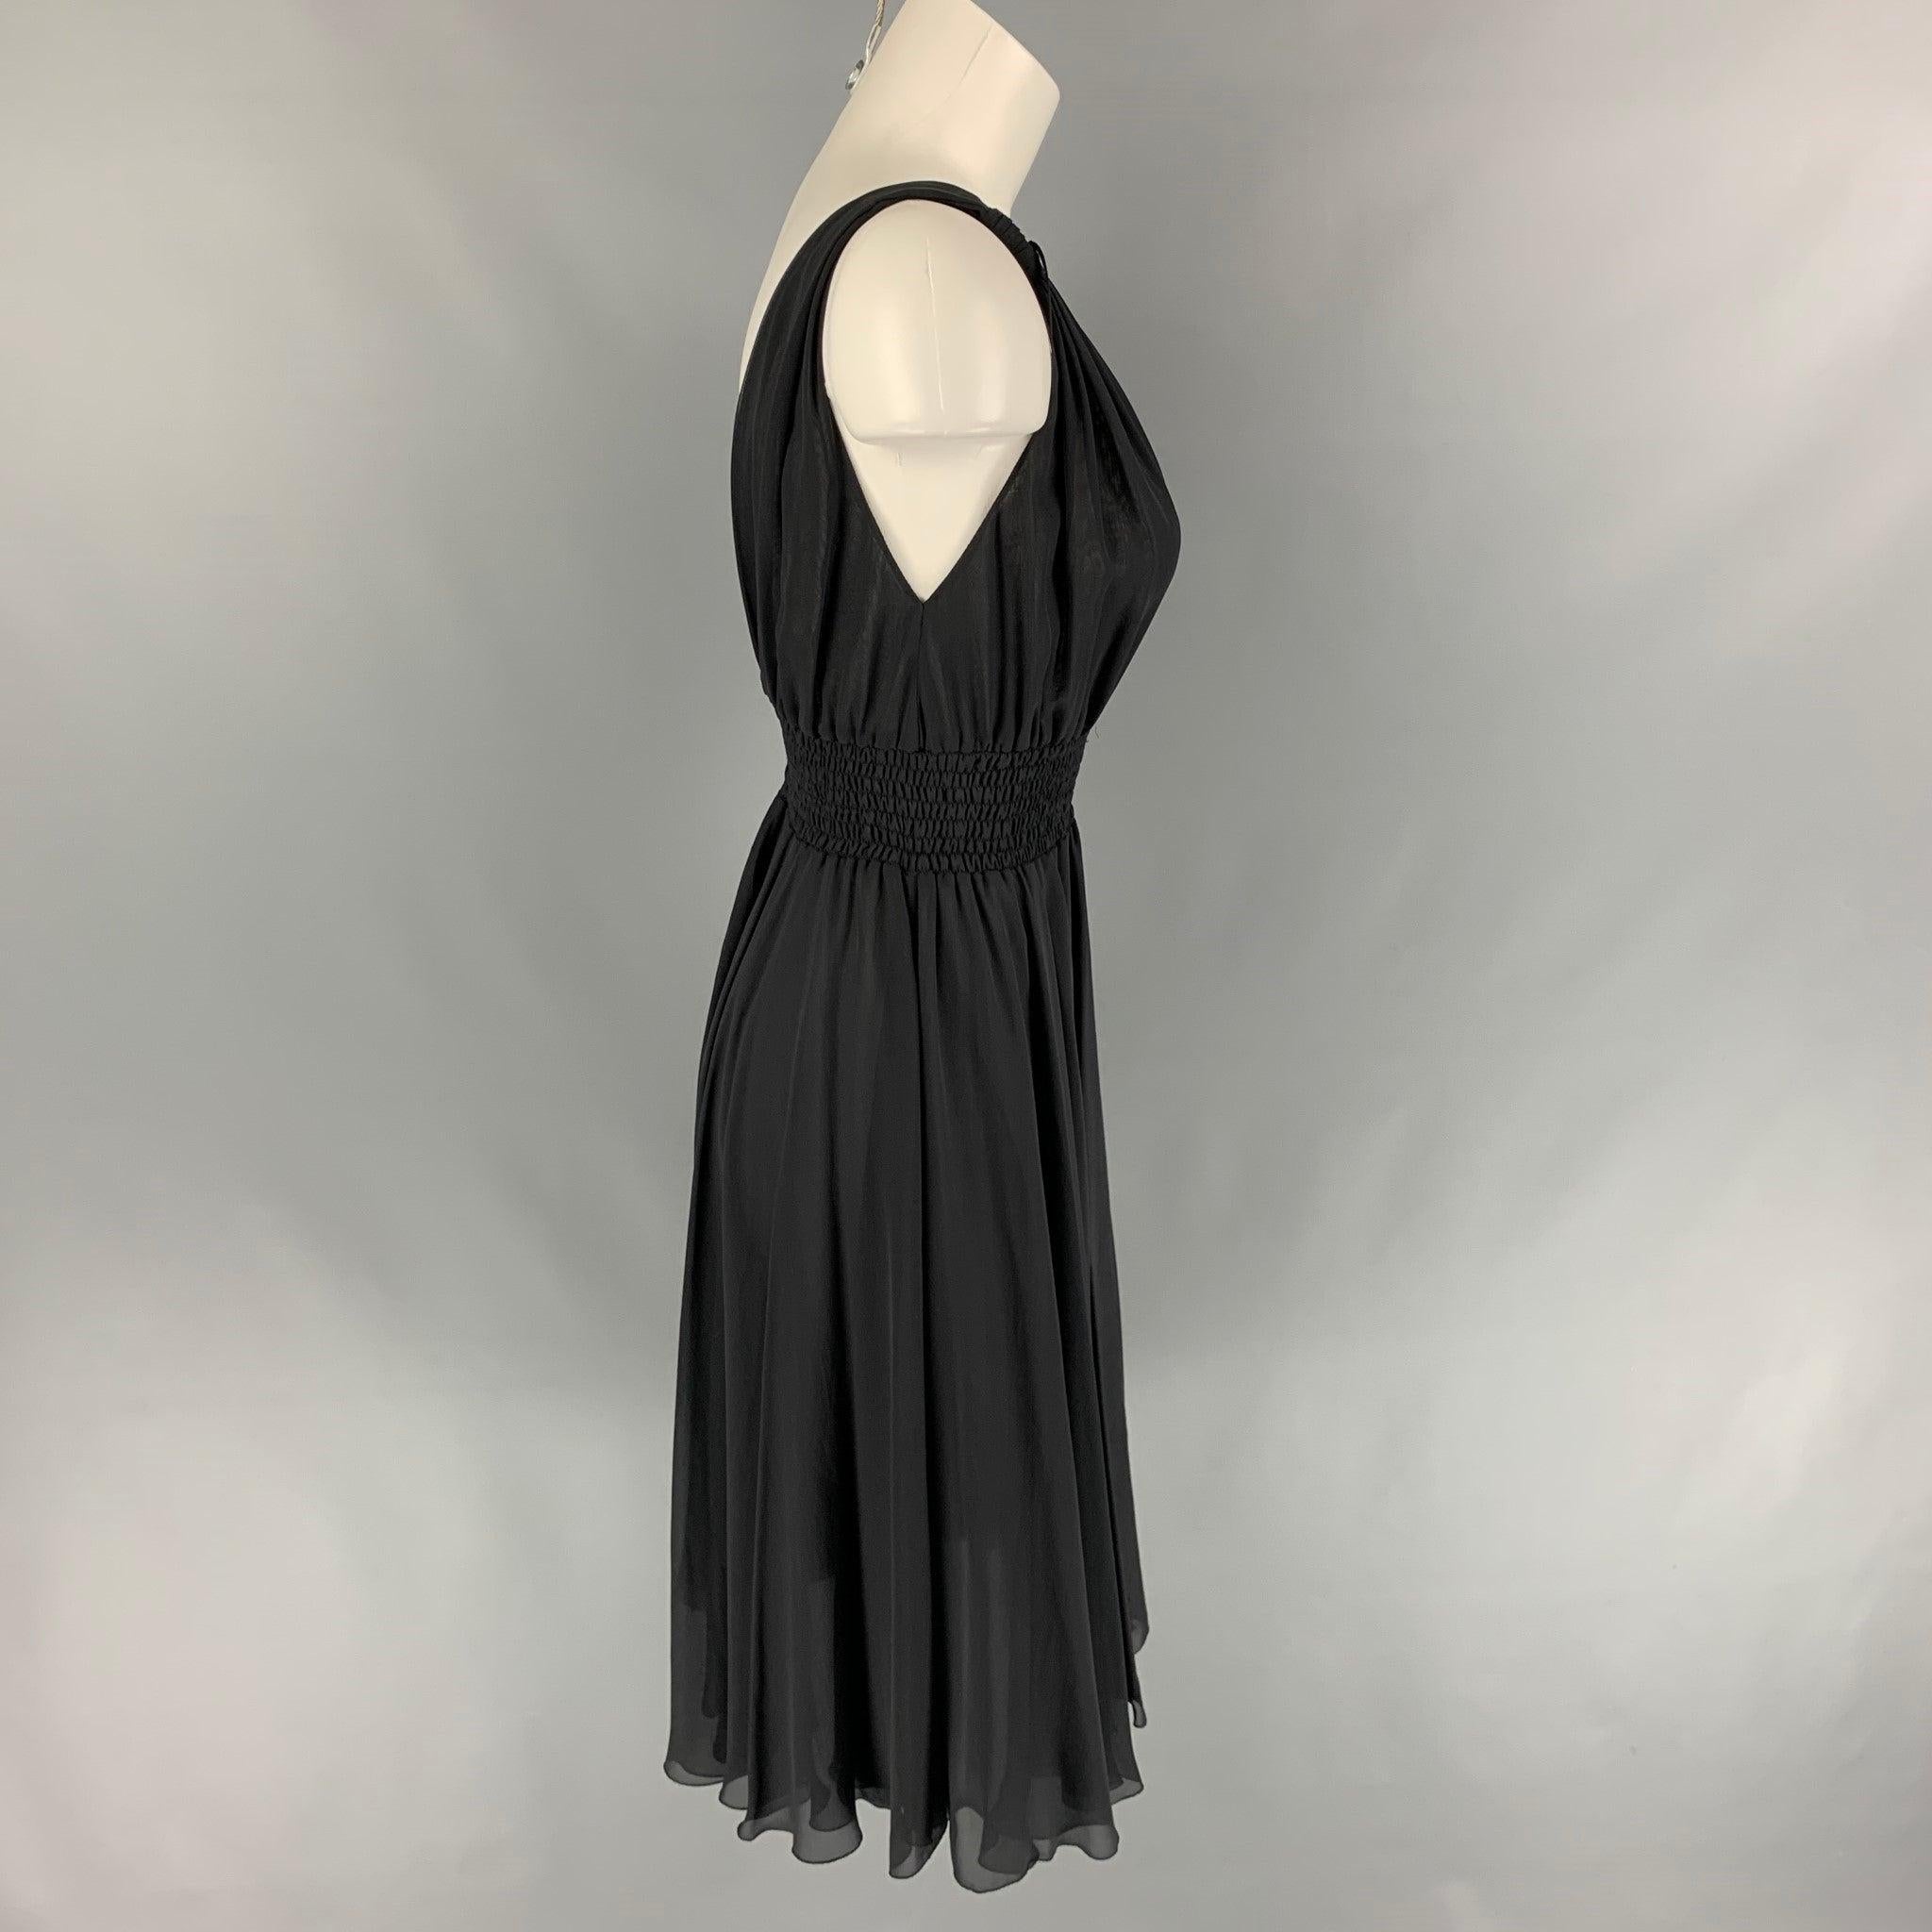 JOHN RICHMOND Size 6 Black Knotted Straps A-Line Dress In Good Condition For Sale In San Francisco, CA